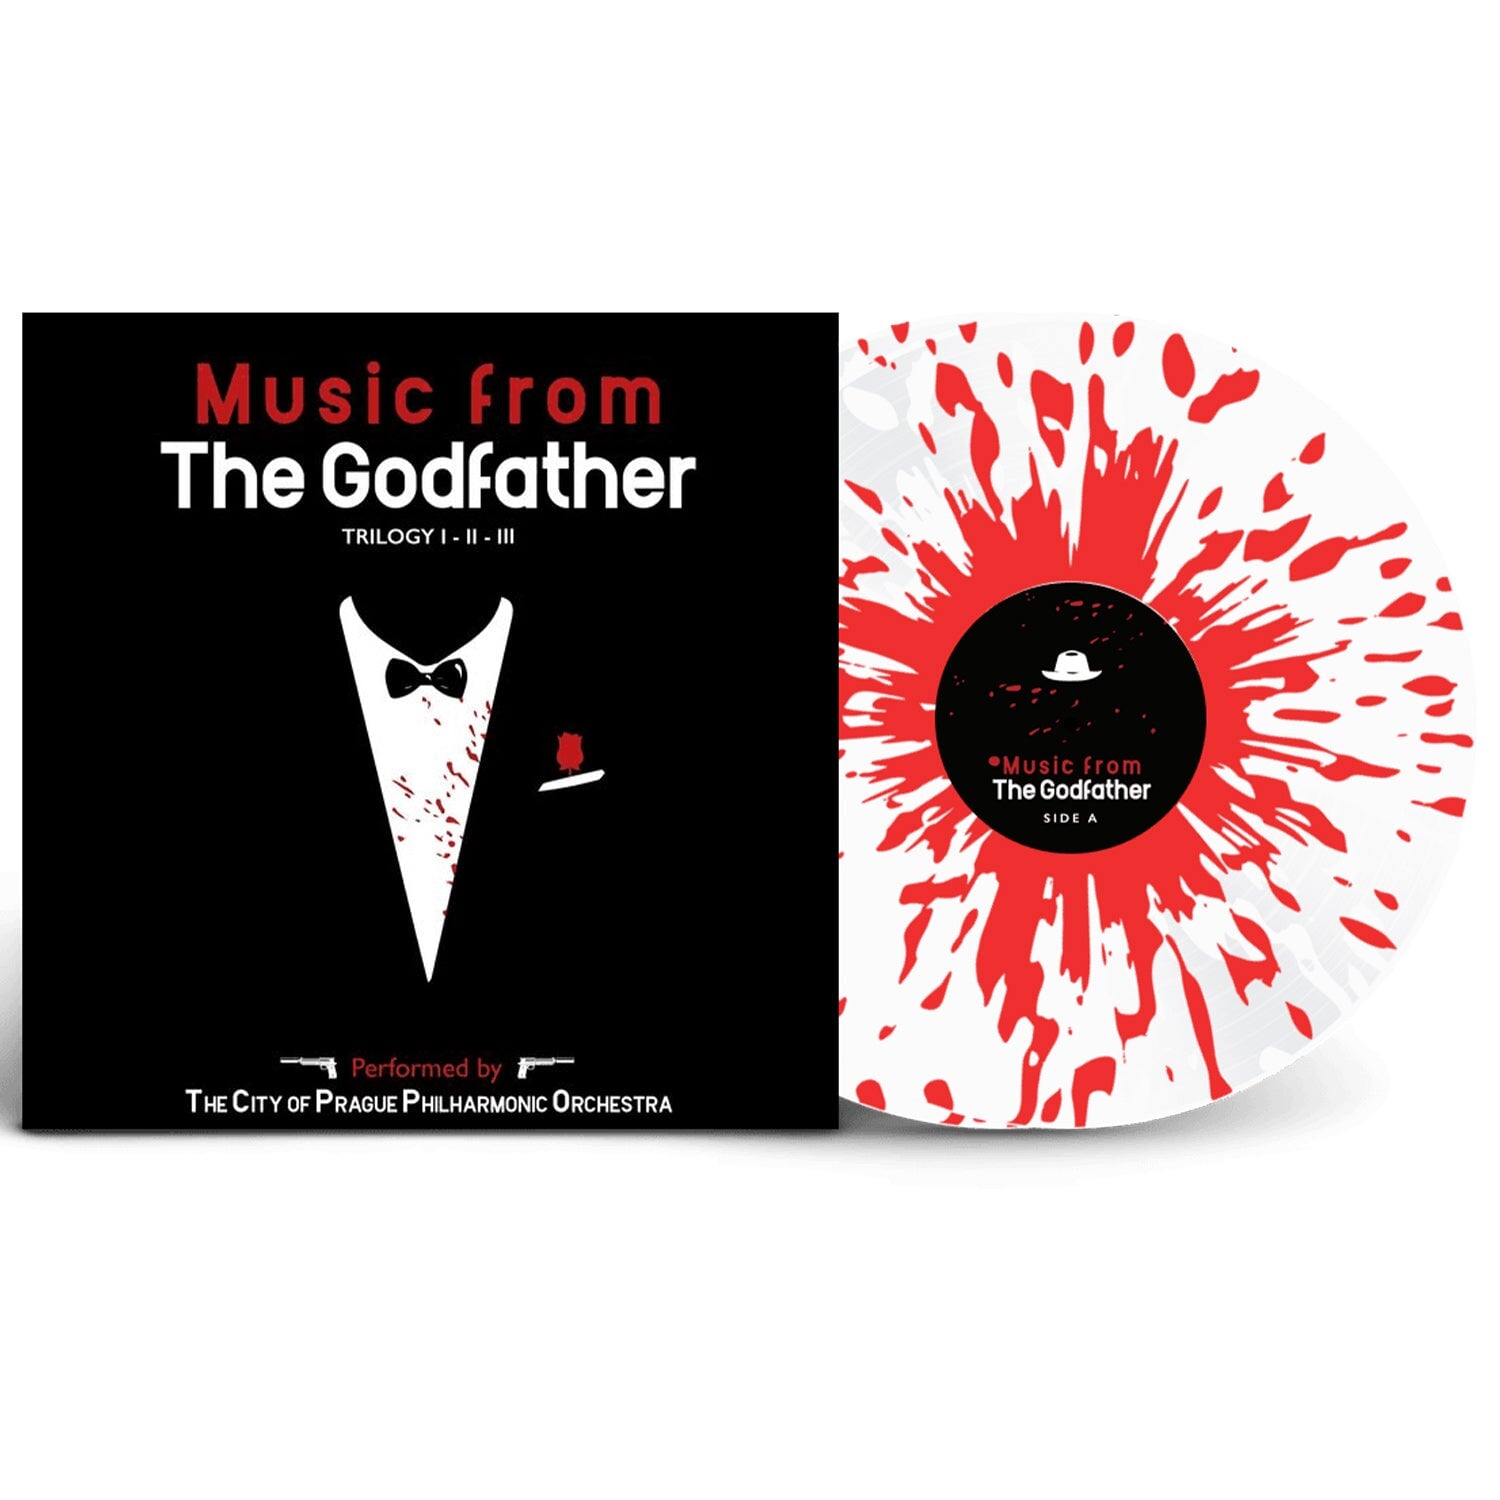 Music From The Godfather Trilogy (The City Of Prague Philharmonic Orchestra) (Blood Red Splattered Vinyl 2LP)